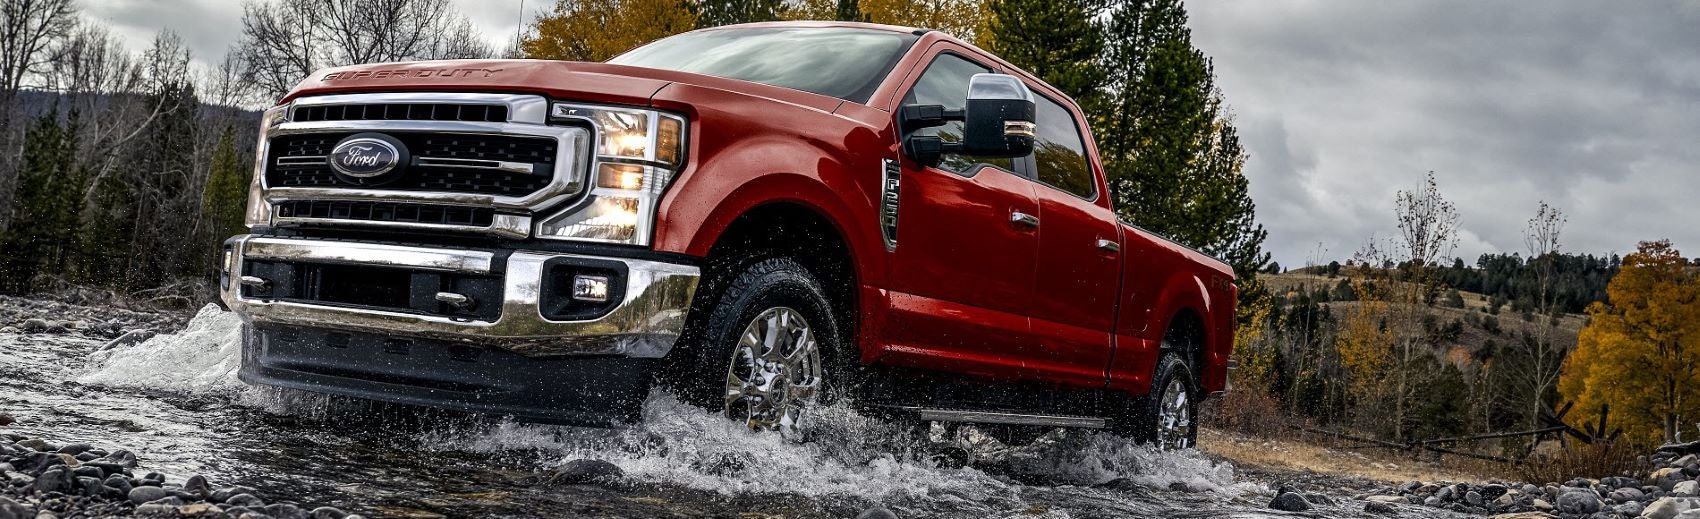 2022 Ford F-250 Super Duty Snipped